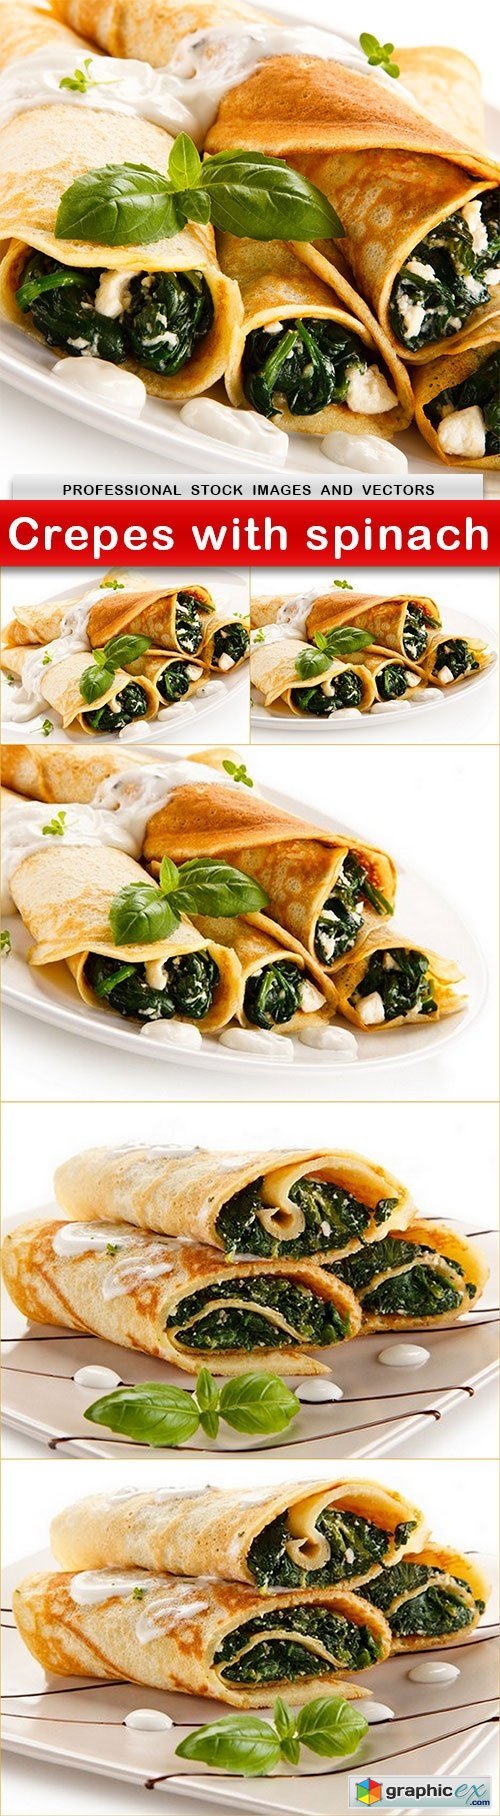 Crepes with spinach - 6 UHQ JPEG